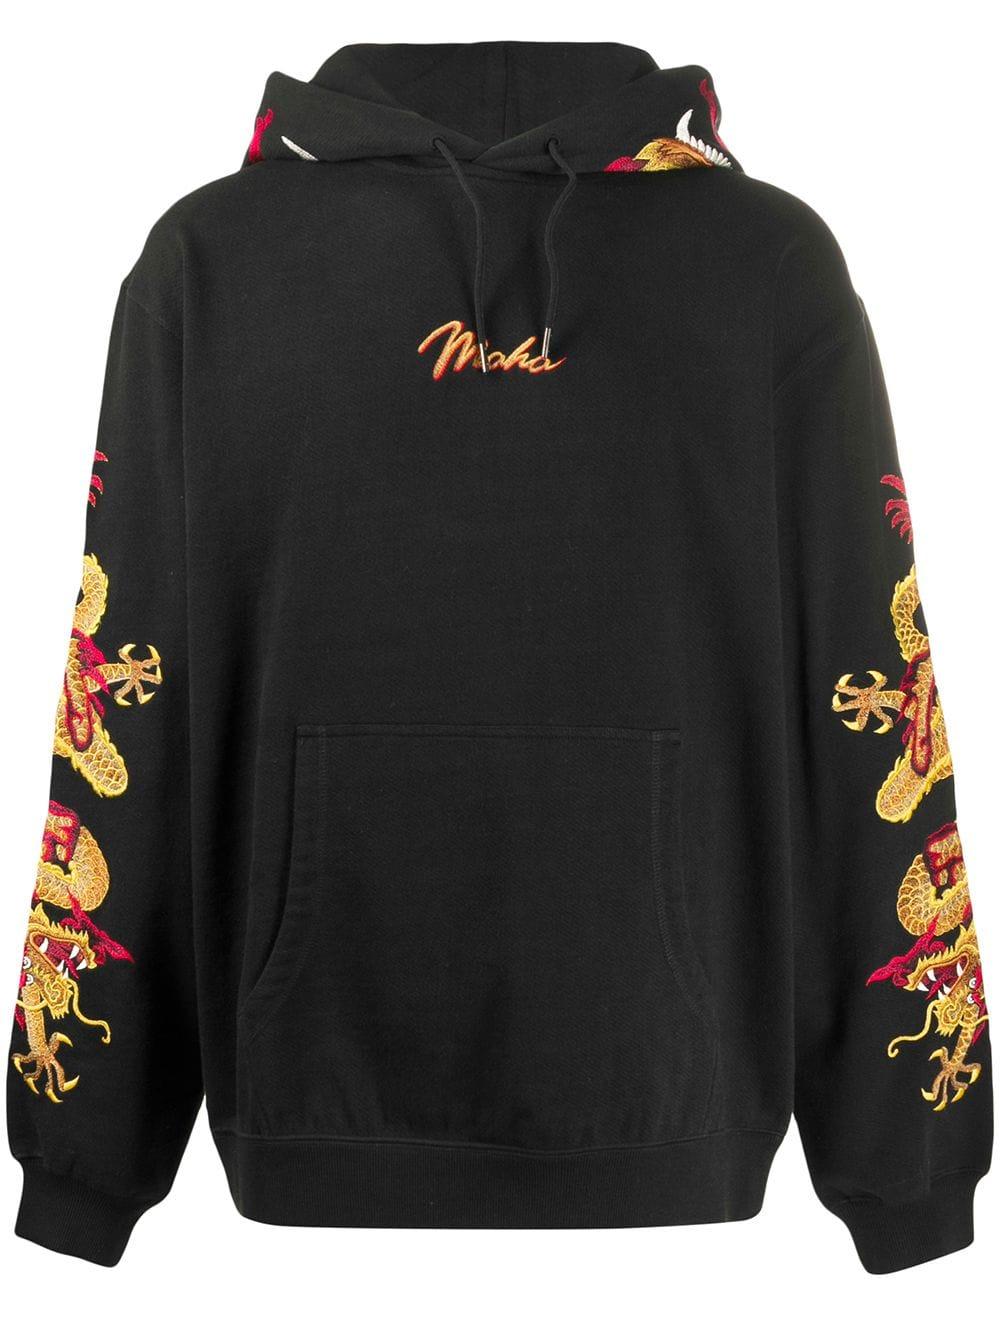 Maharishi Cotton Dragon Embroidery Hoodie in Black for Men - Lyst